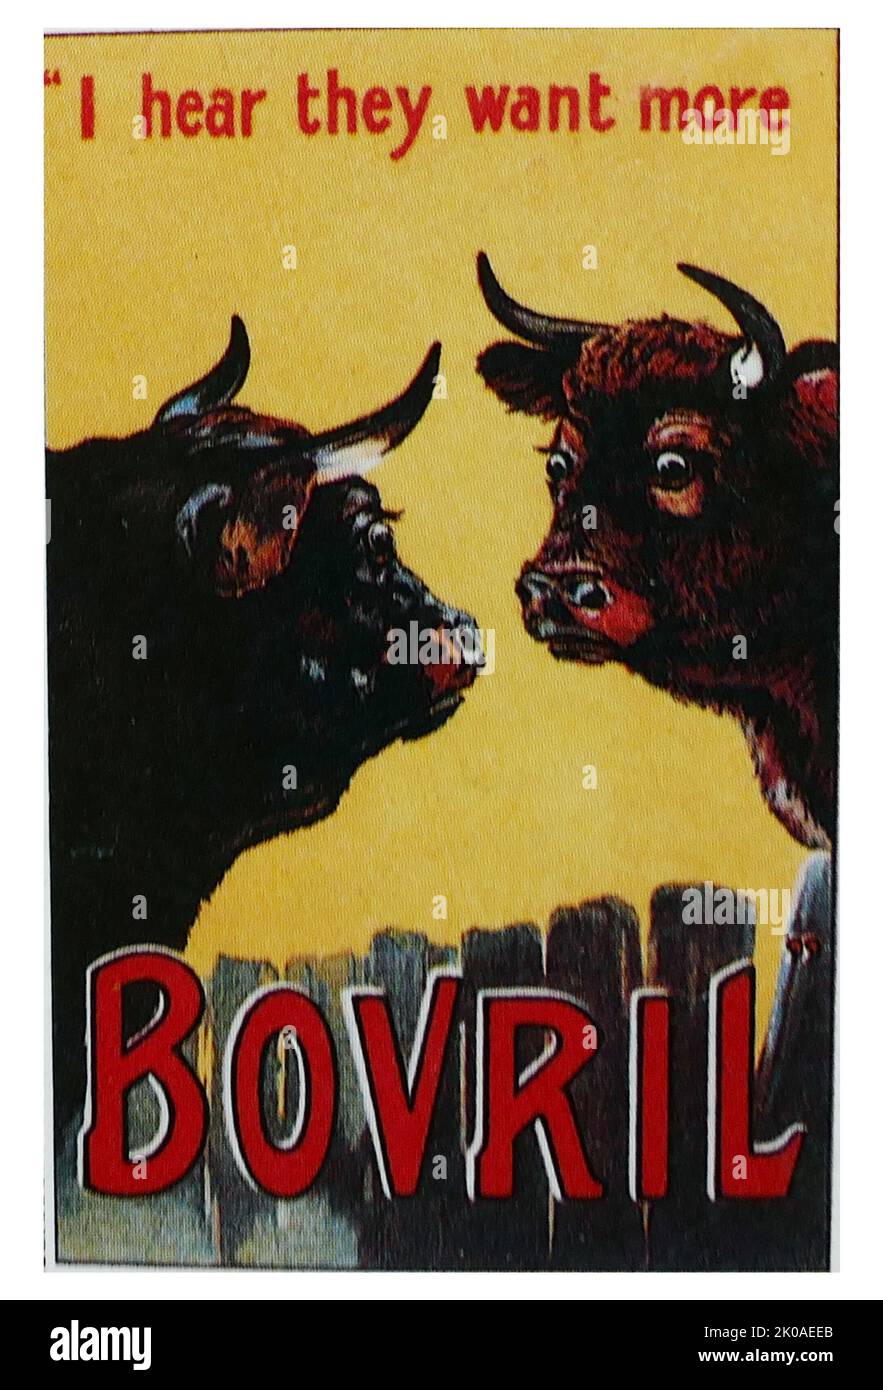 Advert for Bovril (12930), the trademarked name of a thick and salty meat extract paste similar to a yeast extract, developed in the 1870s by John Lawson Johnston Stock Photo